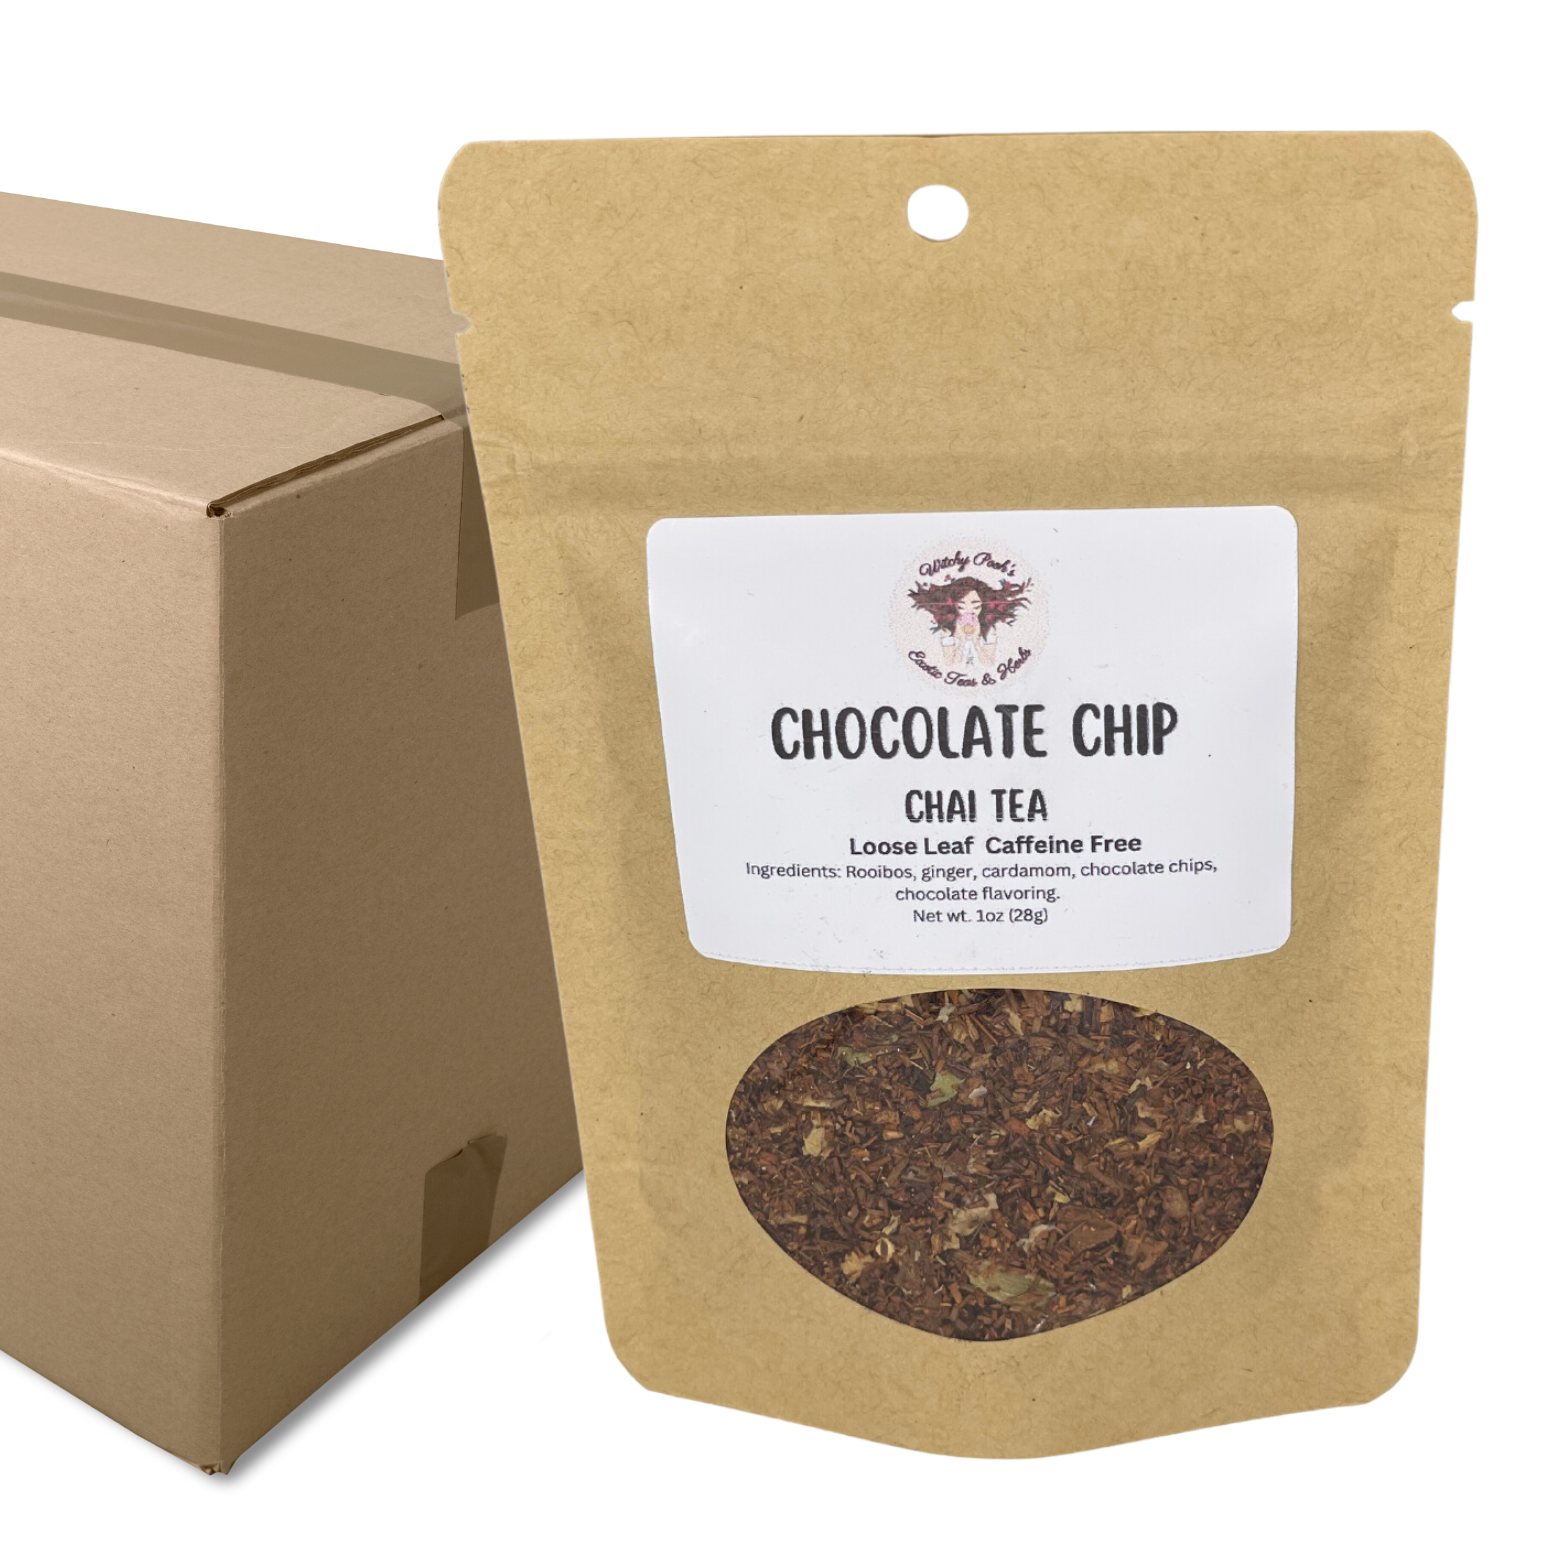 Witchy Pooh's Chocolate Chip Chai Loose Leaf Rooibos Herbal Tea with Real Chocolate Chips!-18